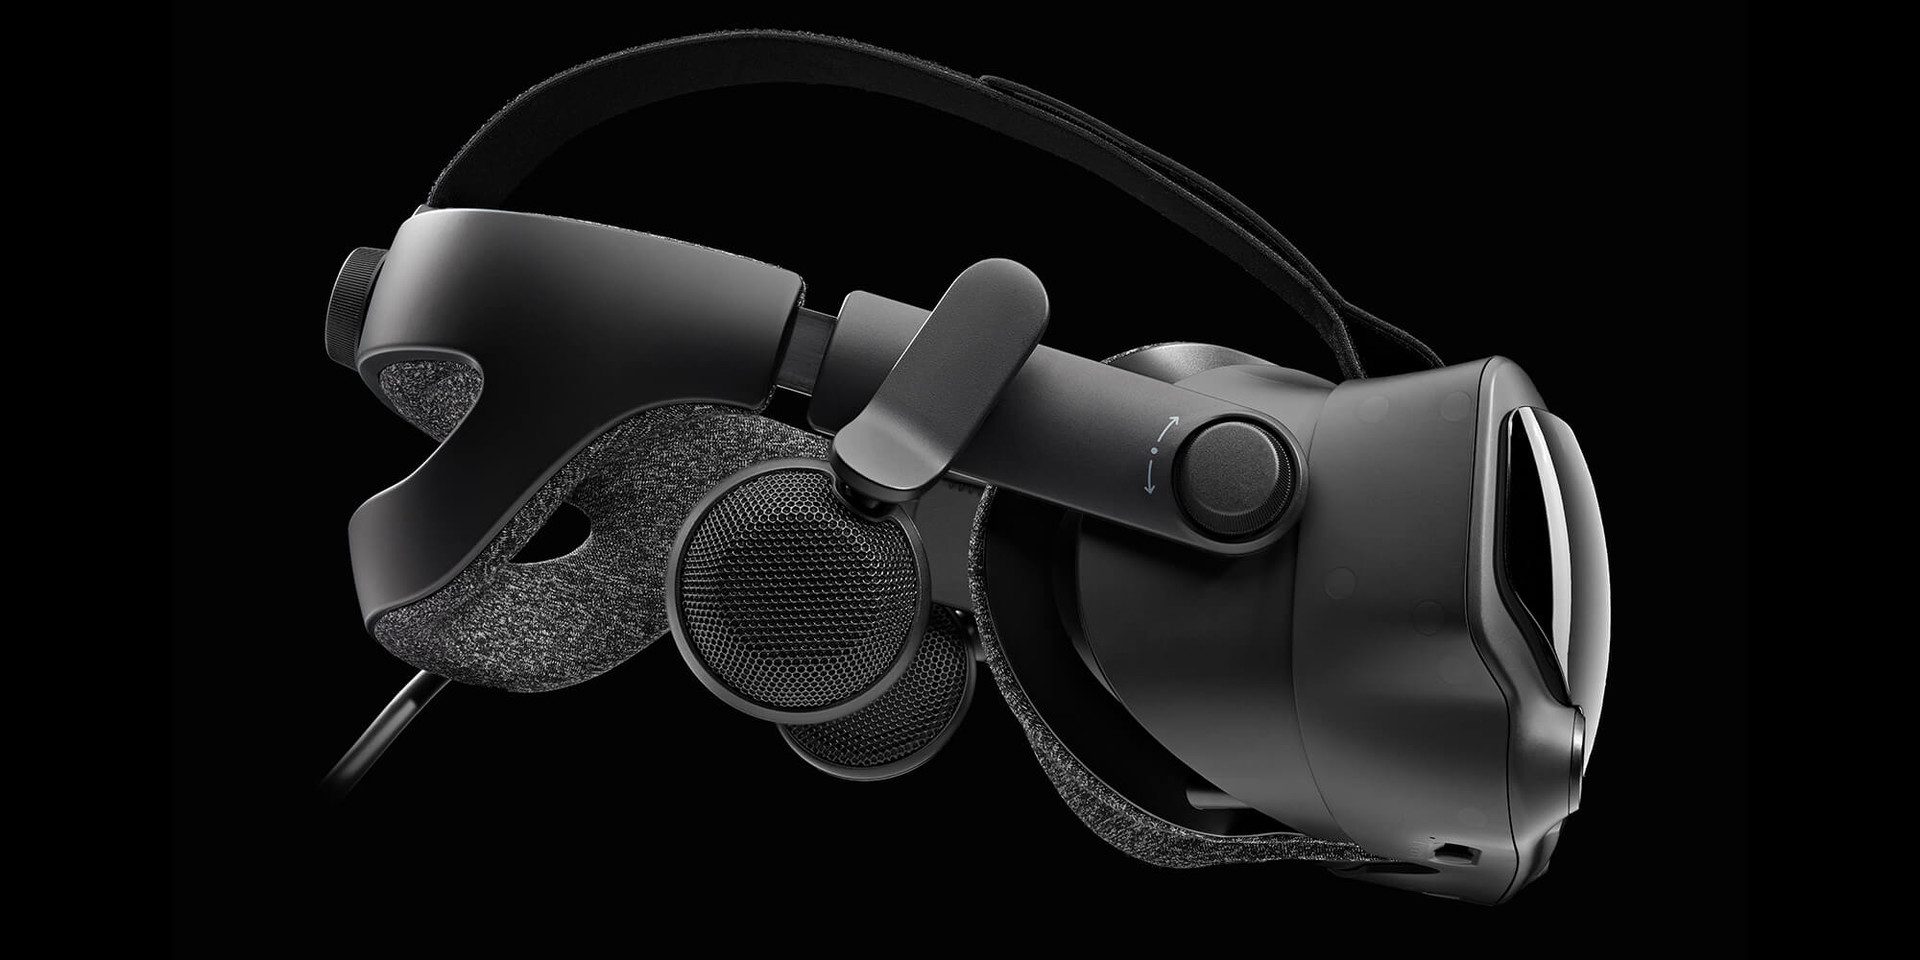 Valve Officially Launches the Valve Index VR HMD, Full Kit Preorder Up for $999 Forums